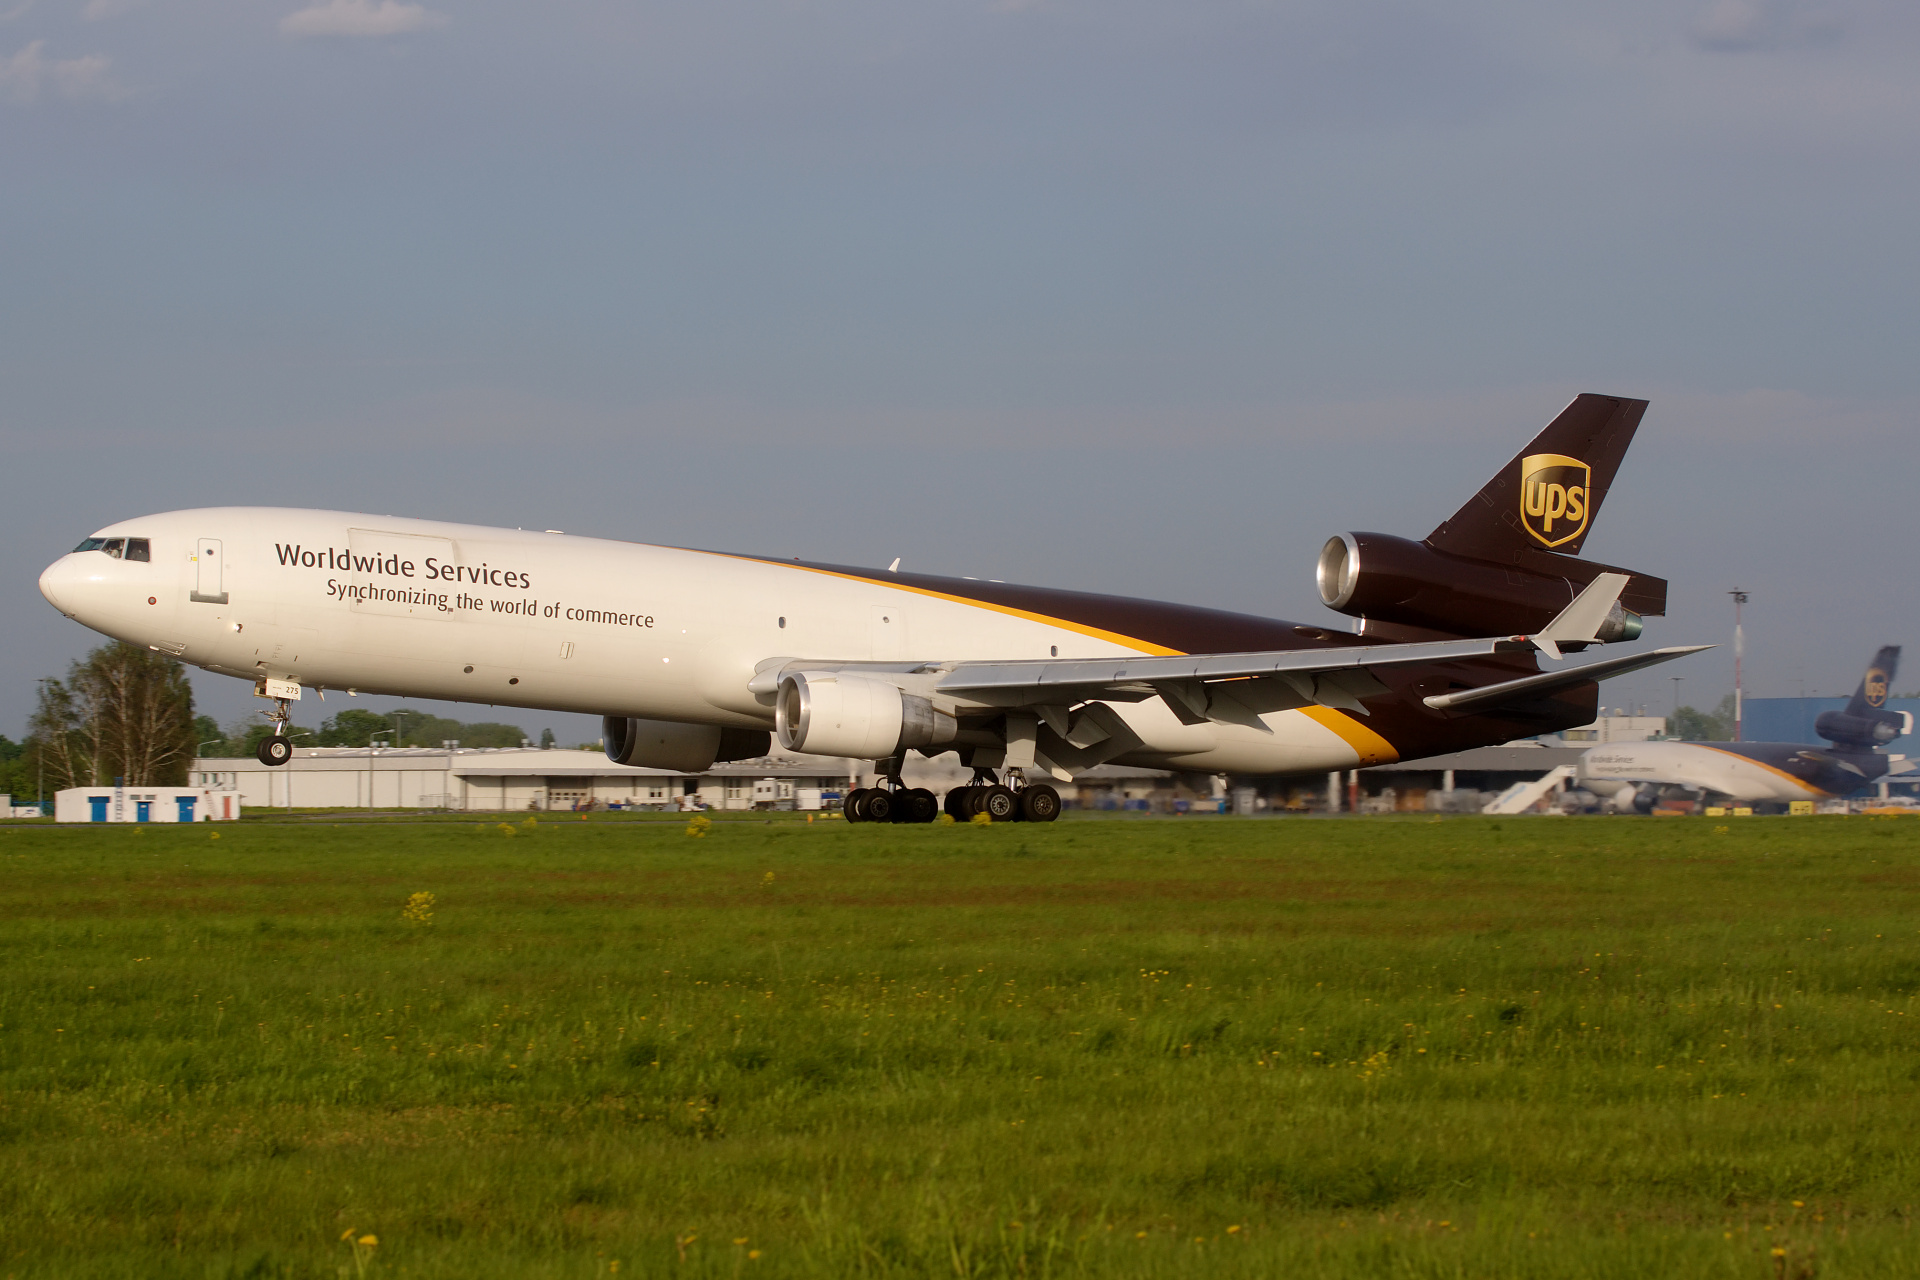 N275UP, United Parcel Service (UPS) Airlines (Aircraft » EPWA Spotting » McDonnell Douglas MD-11F)